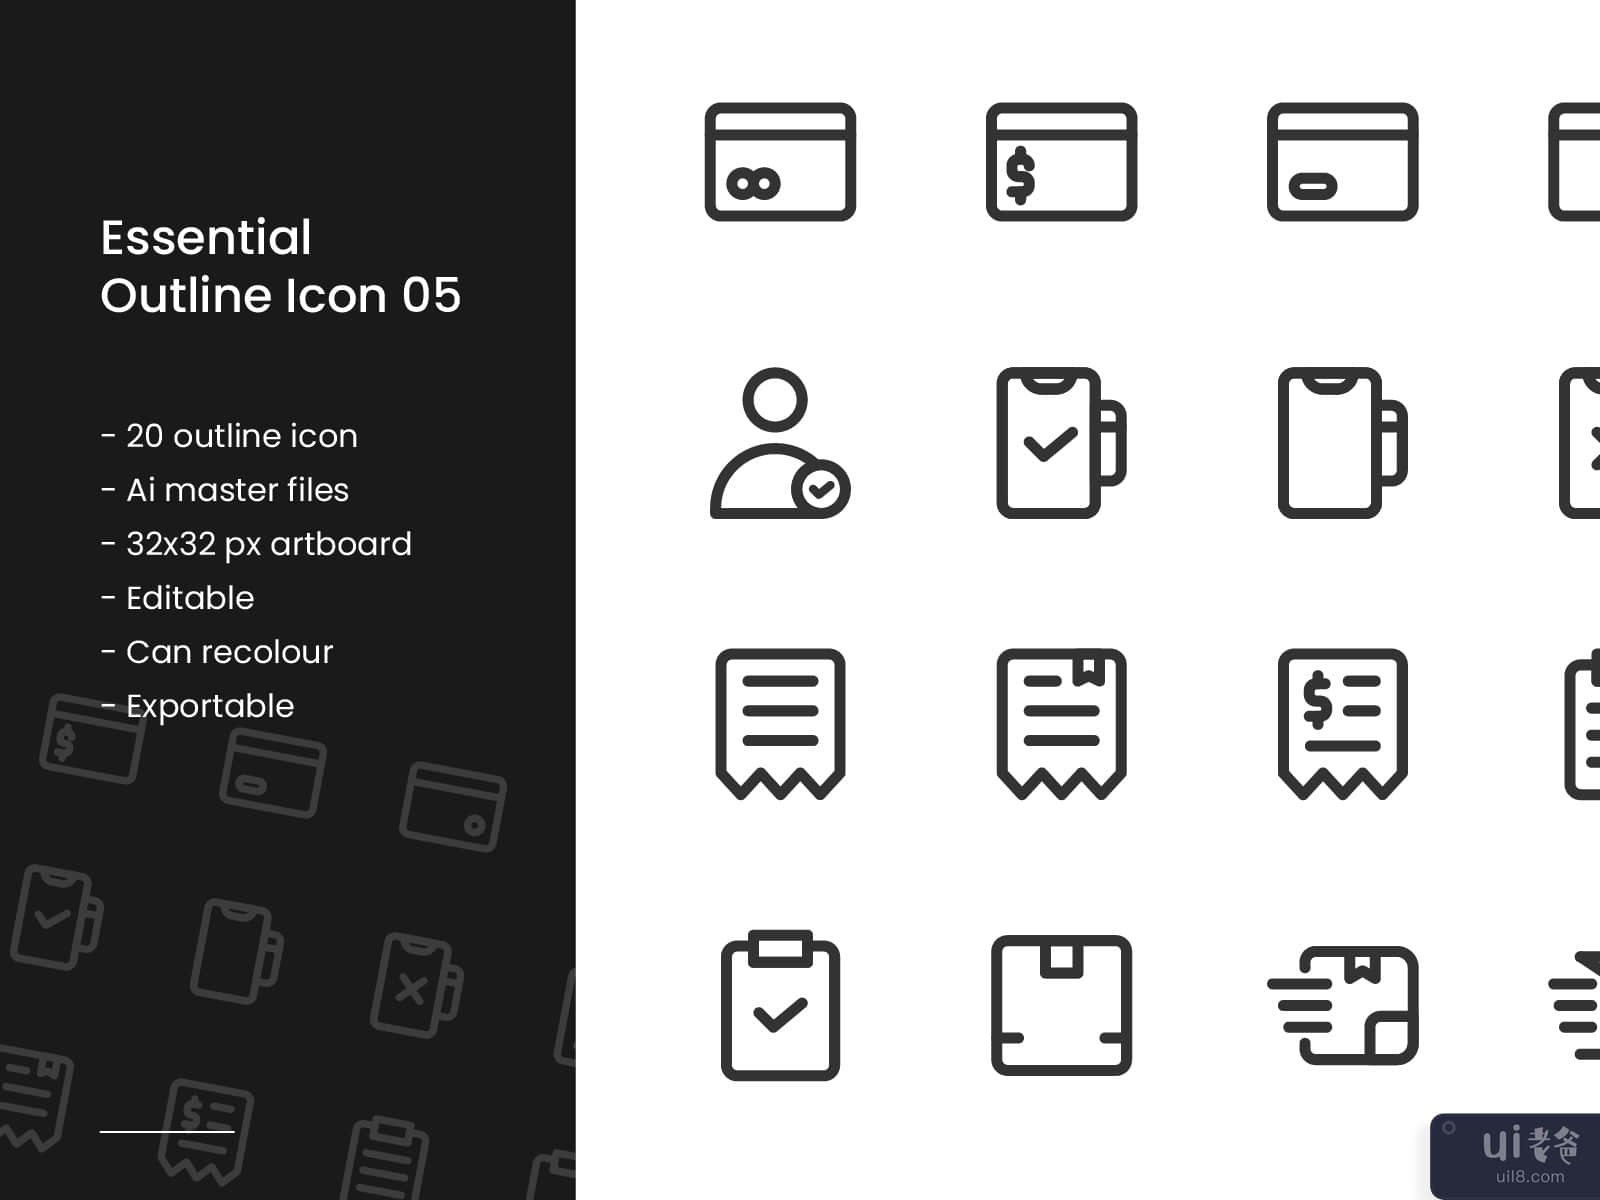 Essential Outline Icon 05